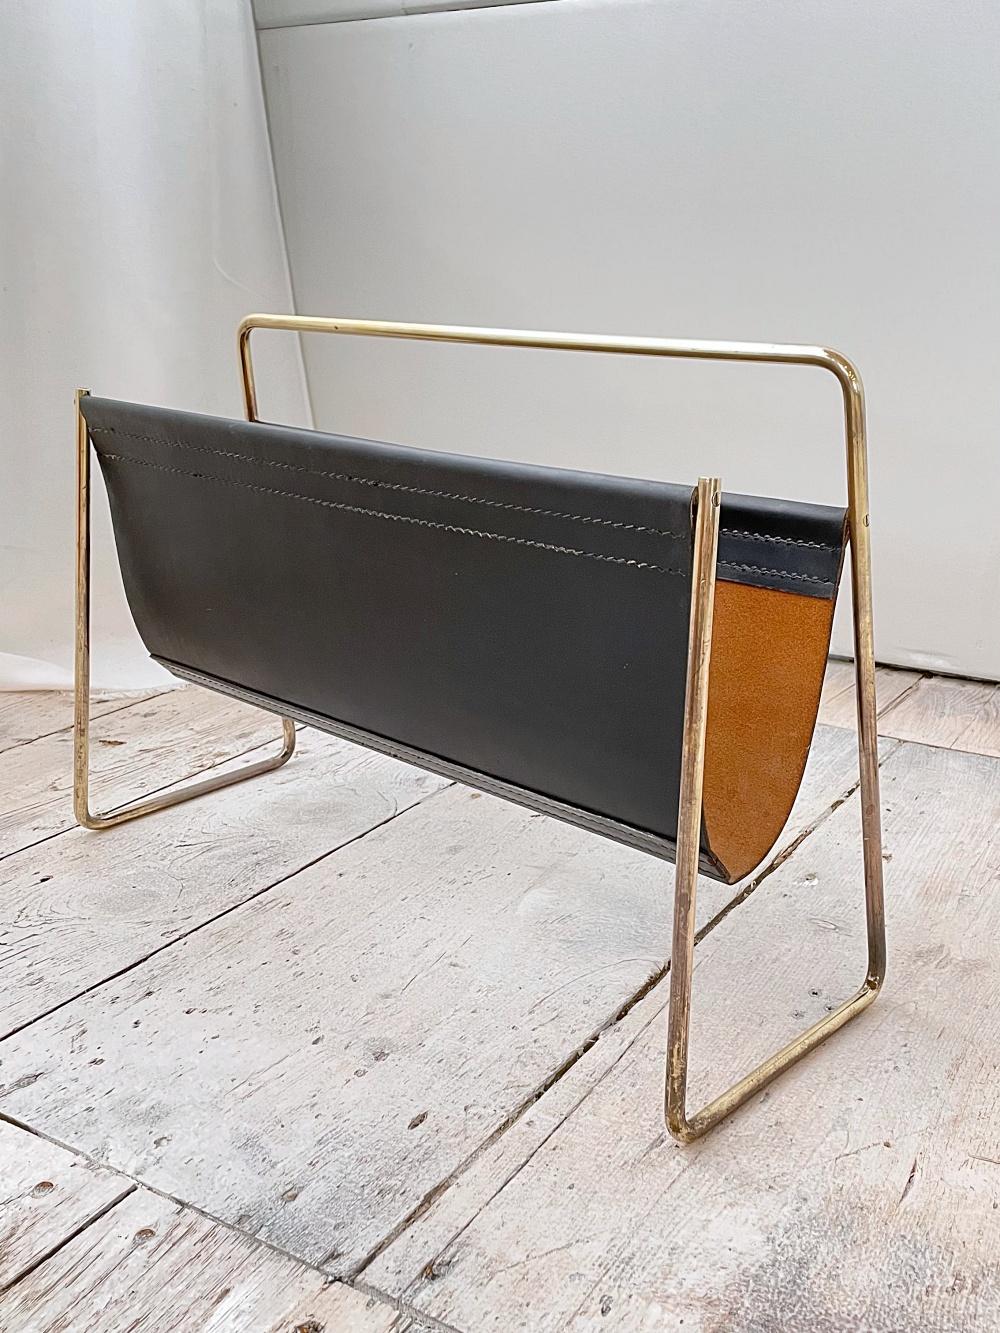 Huge timeless Austrian Mid-Century Modern newspaper/magazine stand no. 4488 designed by Carl Auböck II from early 1950s and manufactured by Auböck Werkstätte in Vienna. 
This magazine rack is original from 50's with the hand stitched black leather